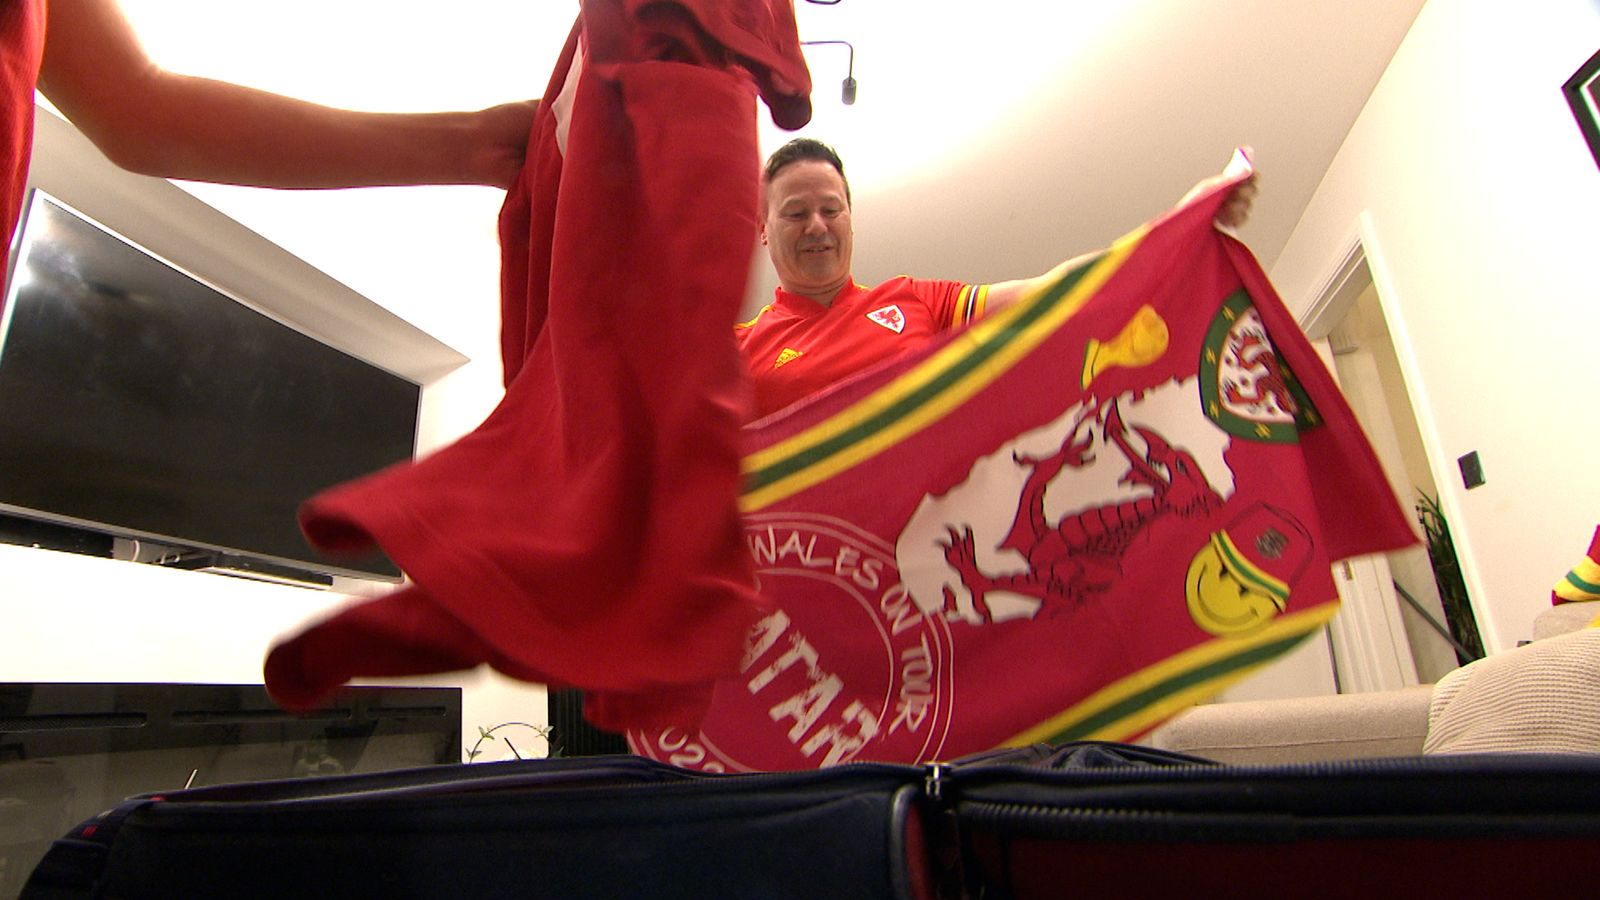 Bale Ale, bucket hats and flags: 'Buzzing' Wales fans head to Qatar for 'once in a lifetime' World Cup